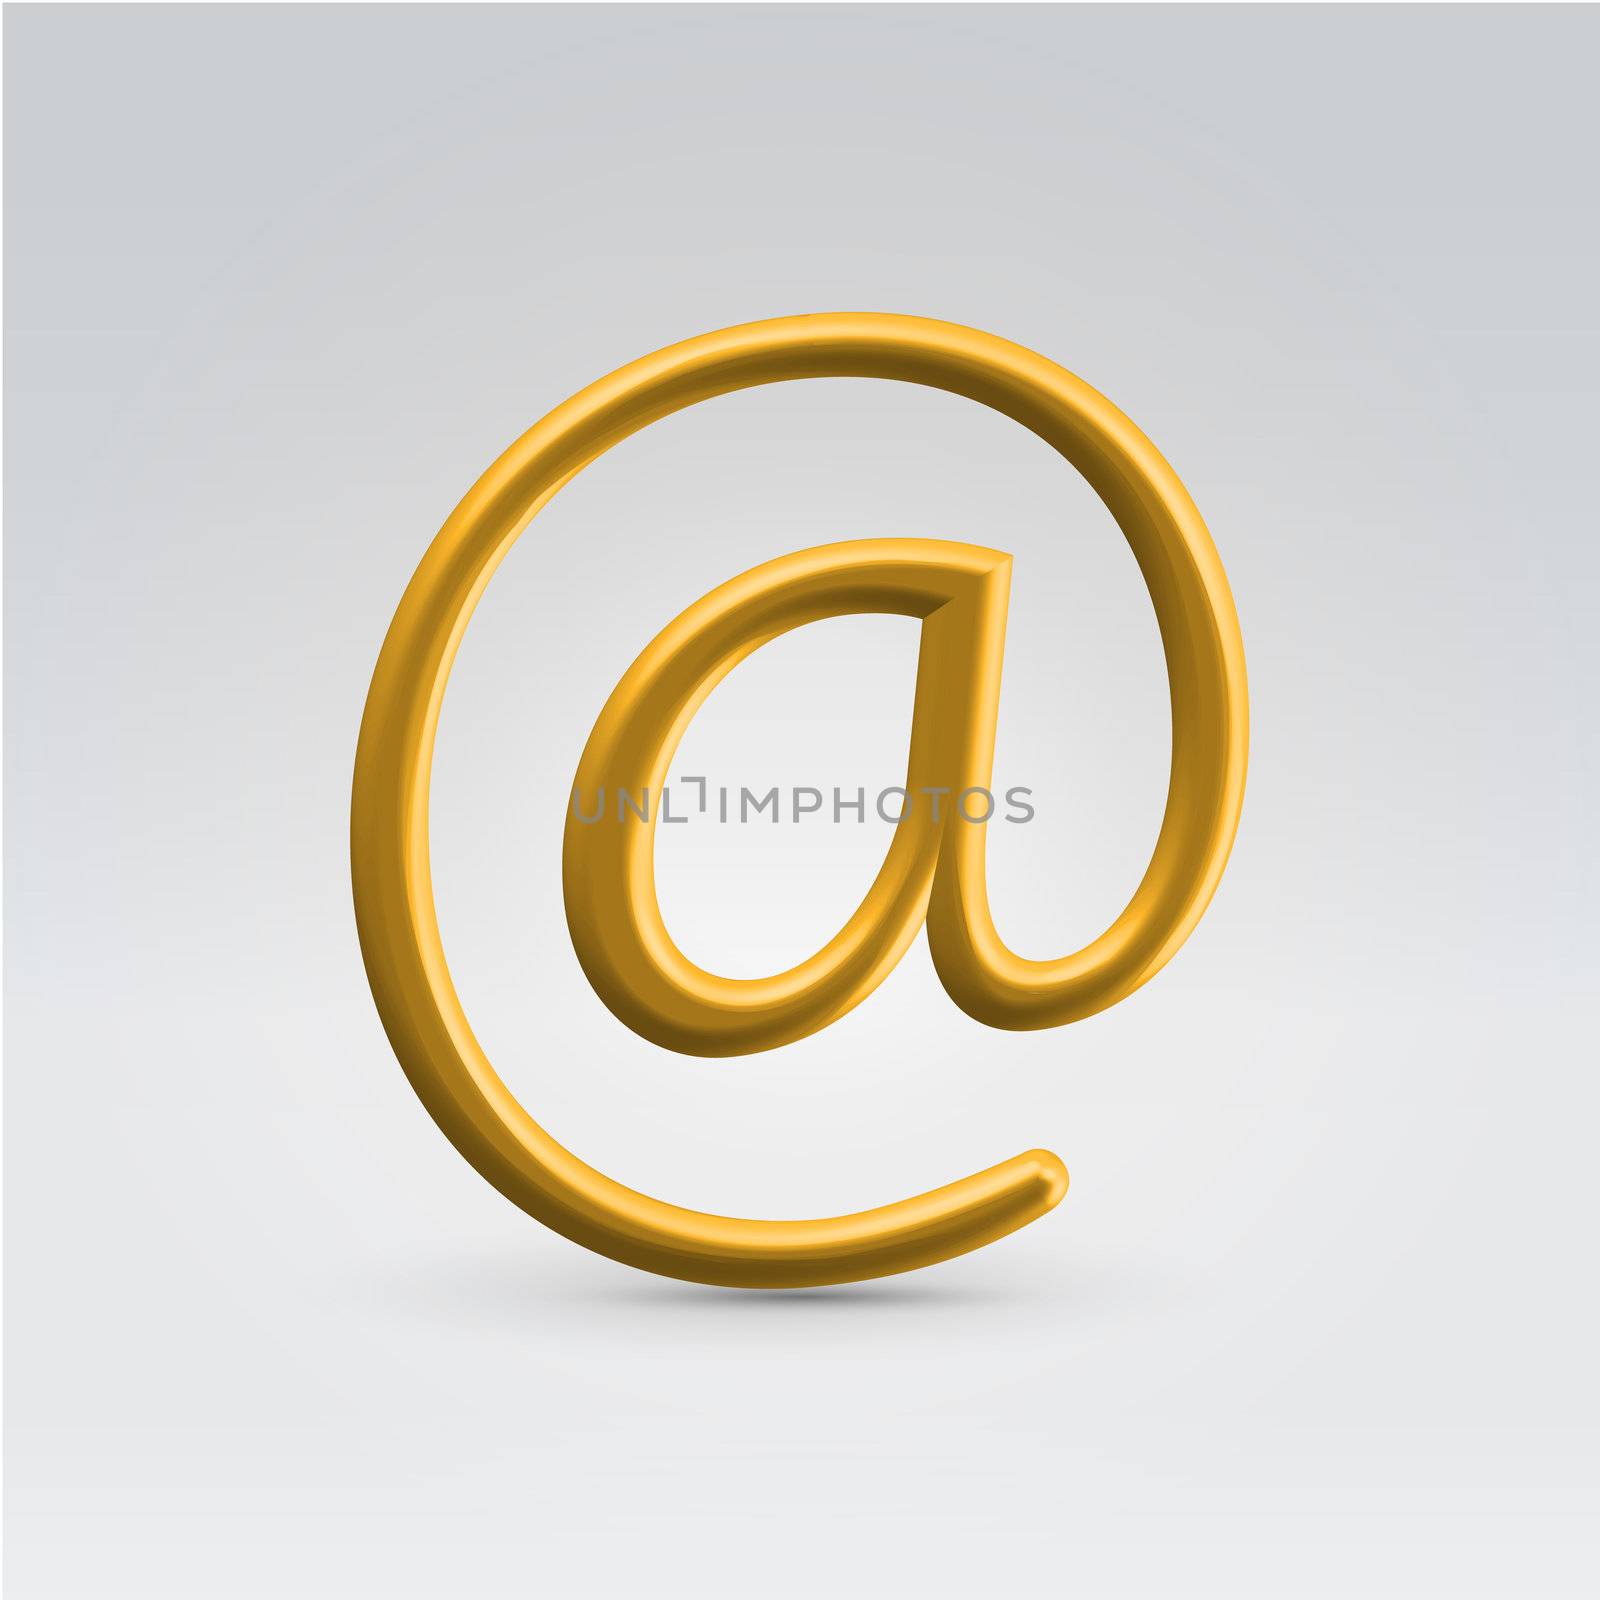 Golden shining metallic email symbol by pics4sale